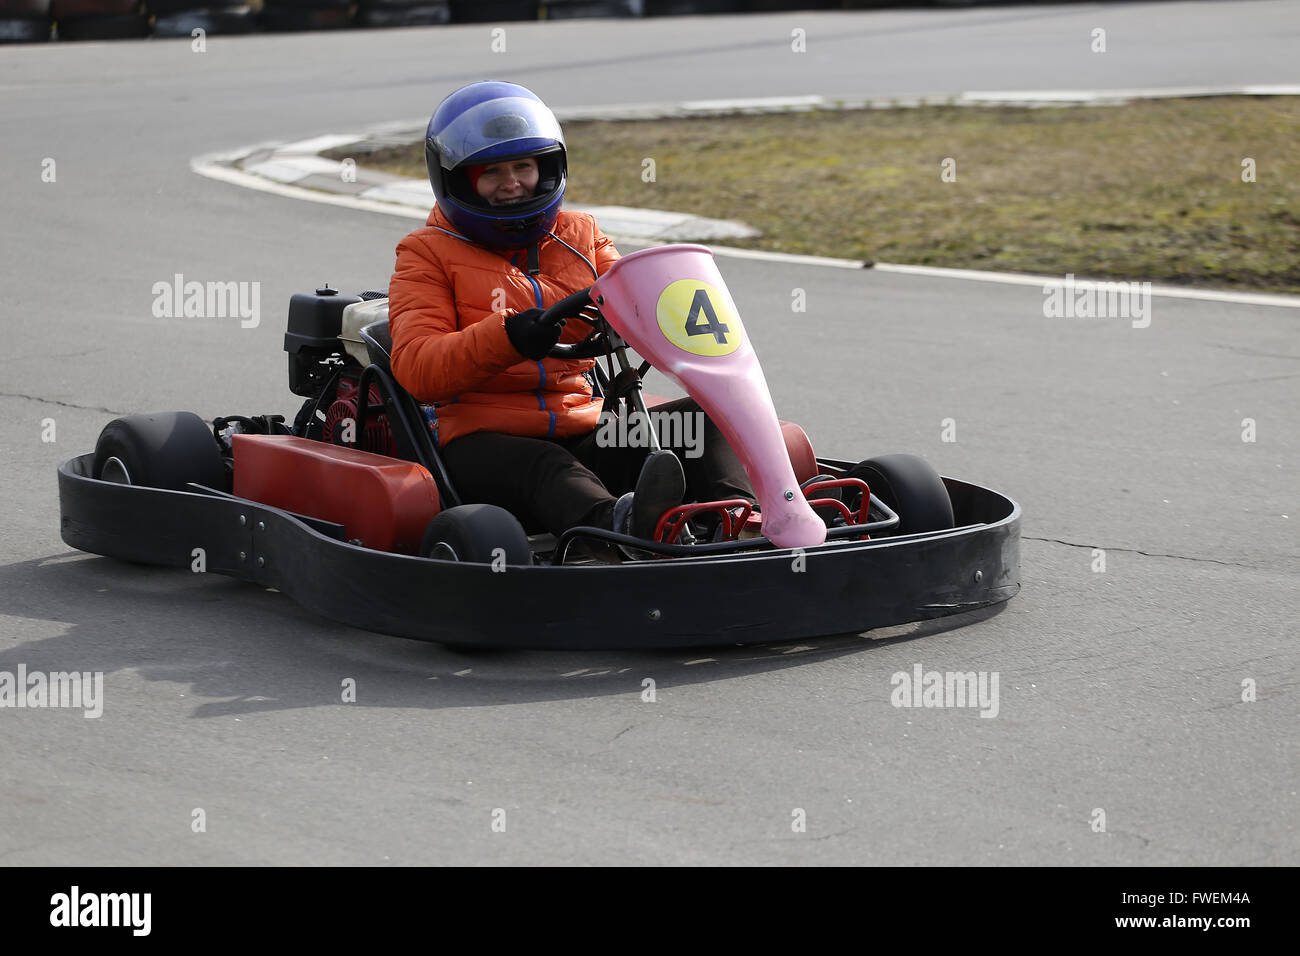 girl is driving Go-kart car with speed in a playground racing track. Go kart is a popular leisure motor sports. Stock Photo